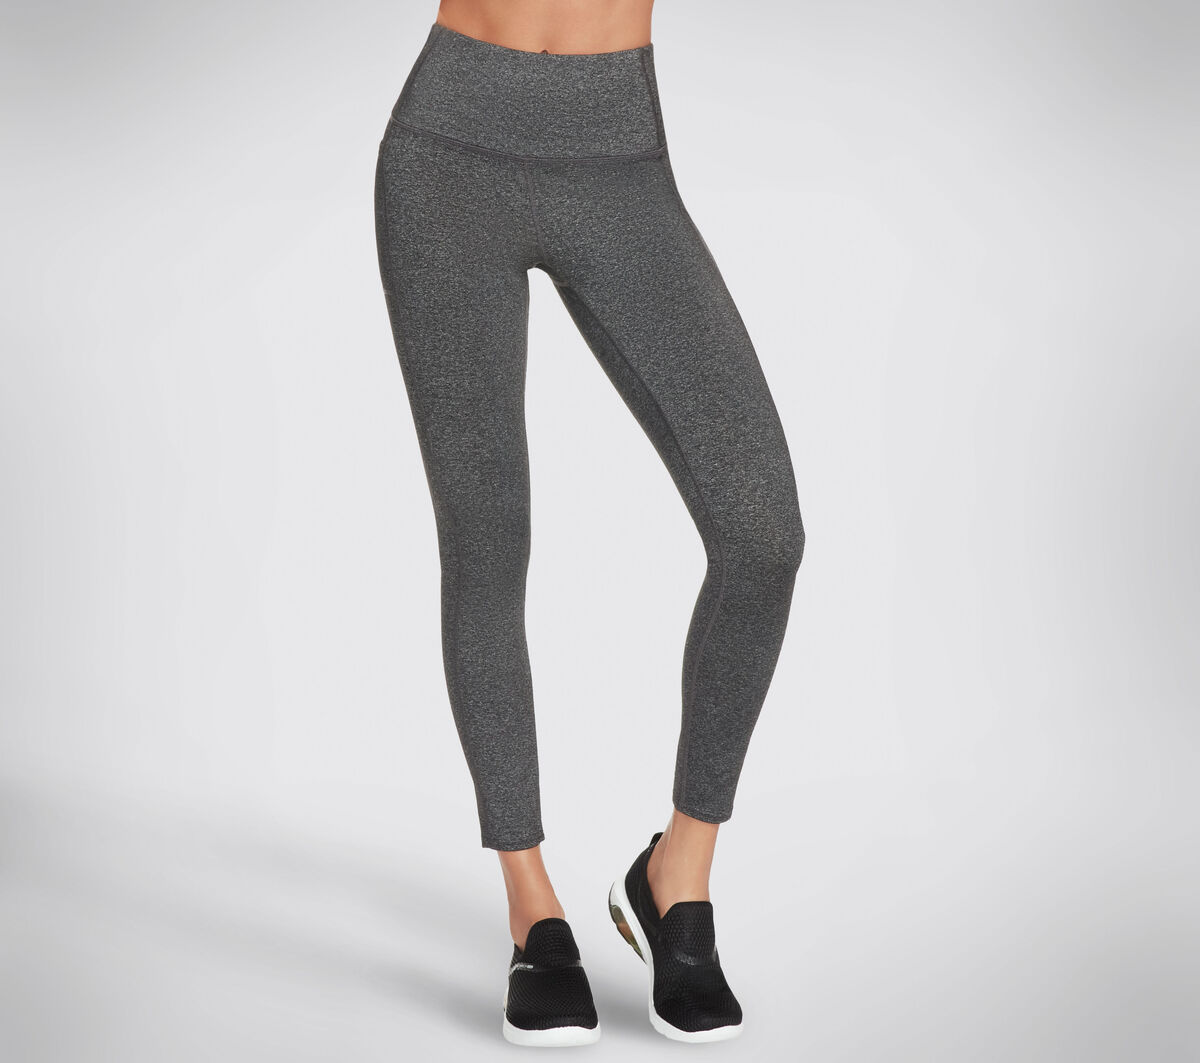 These top-rated Skechers leggings are on sale at Zappos